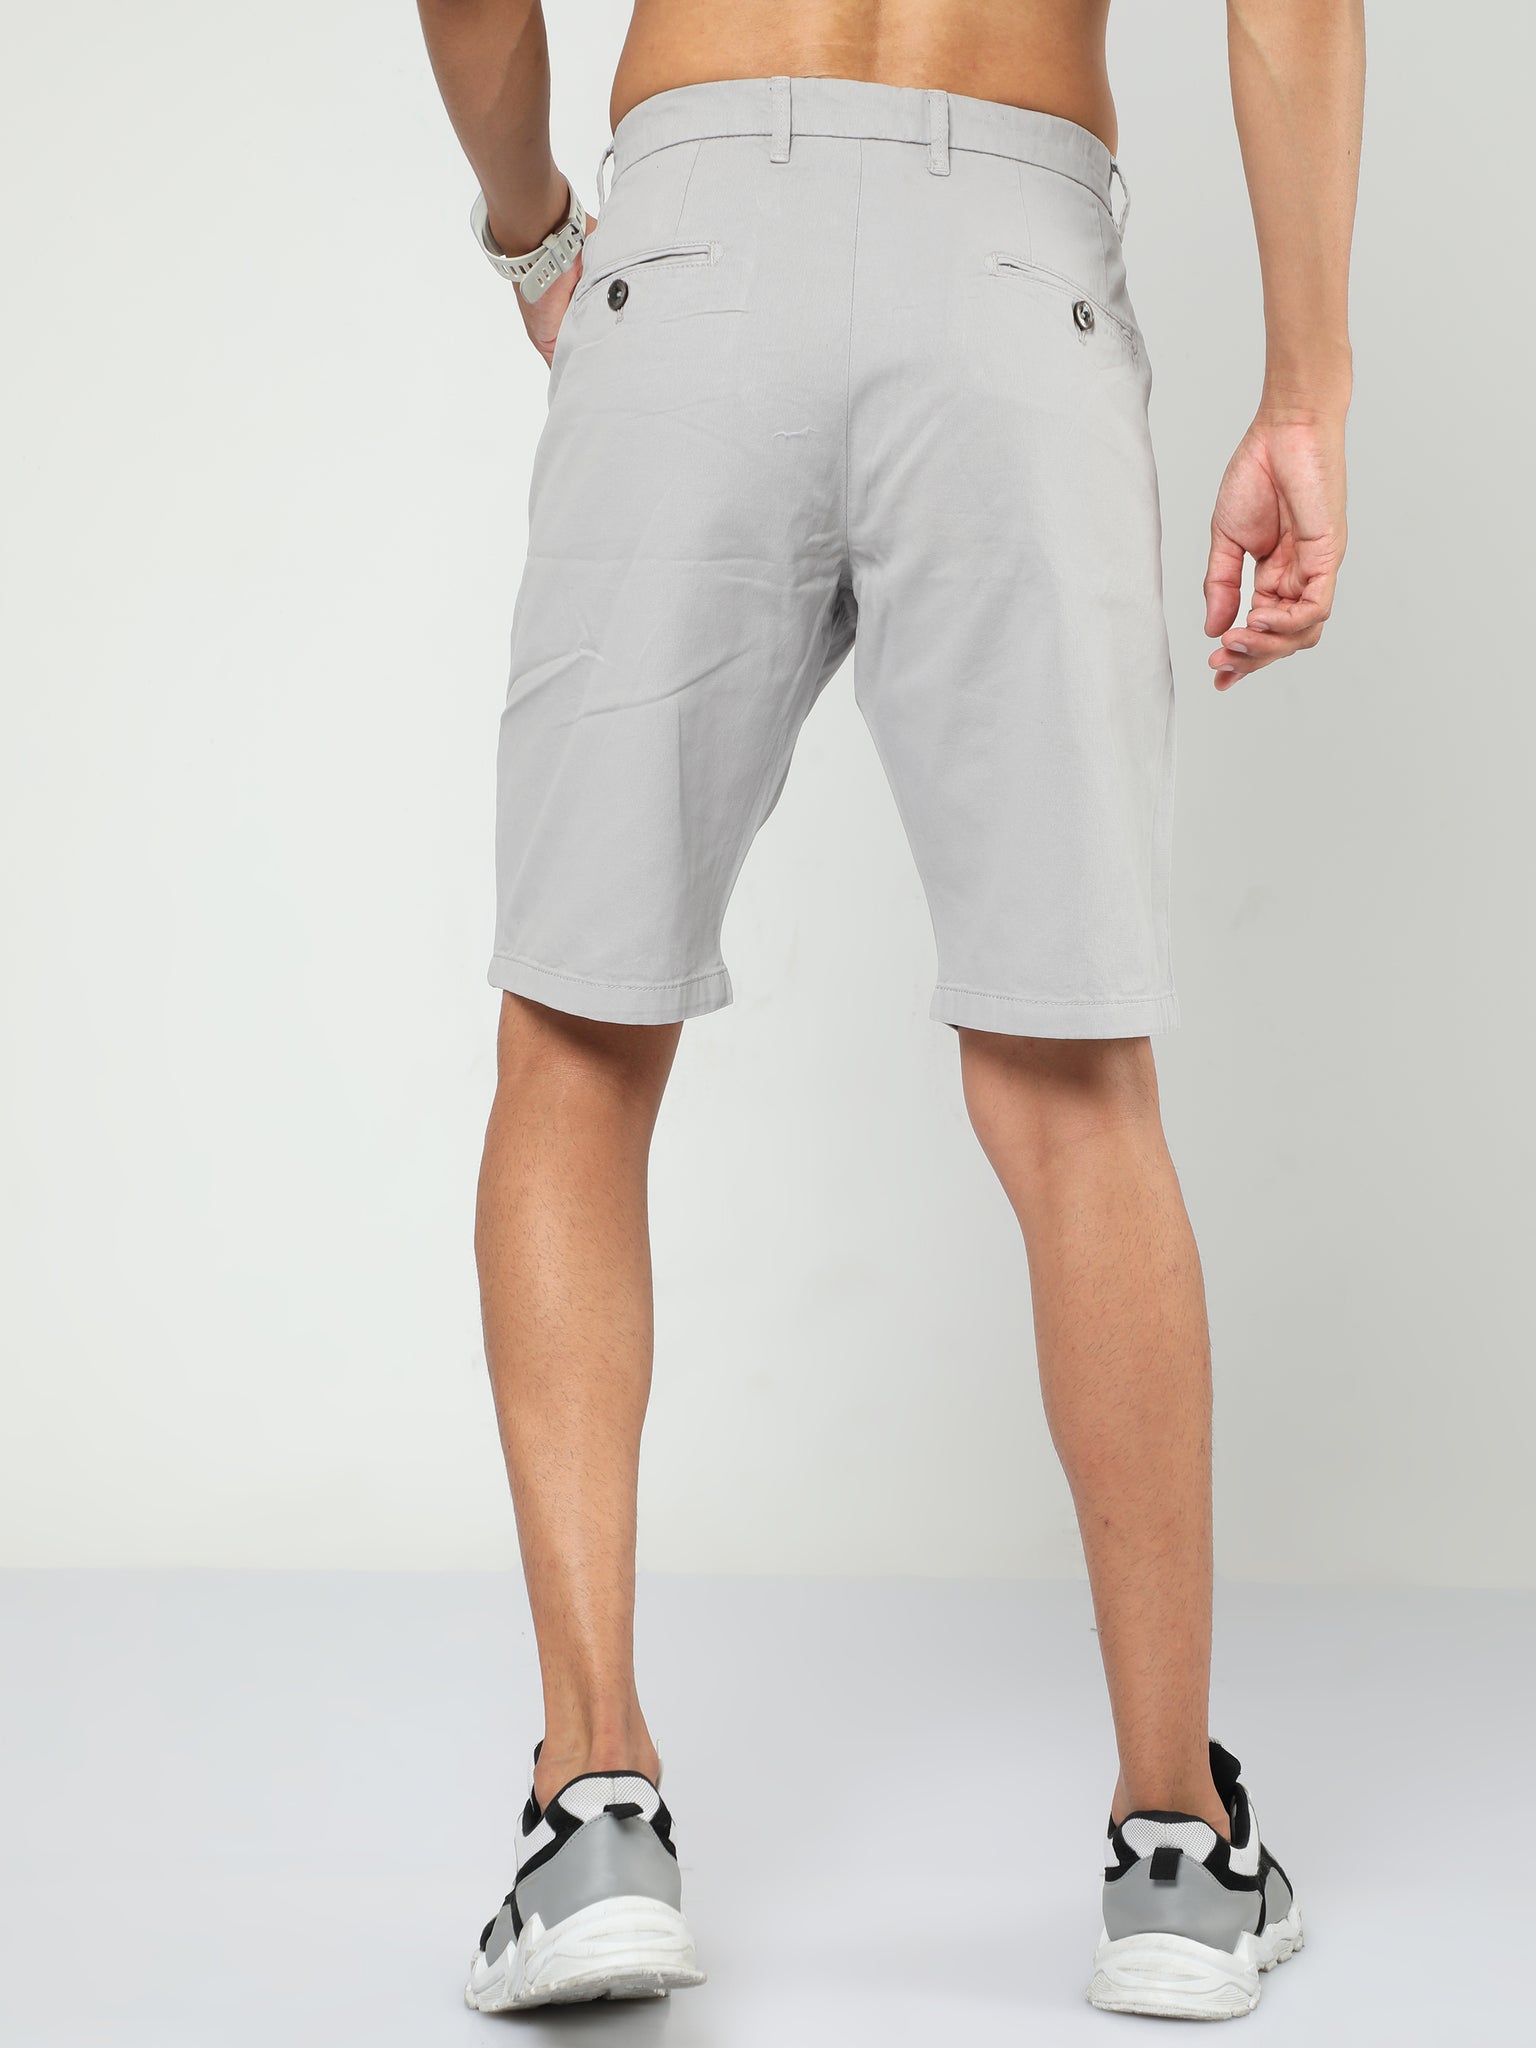 French Grey Shorts for Men